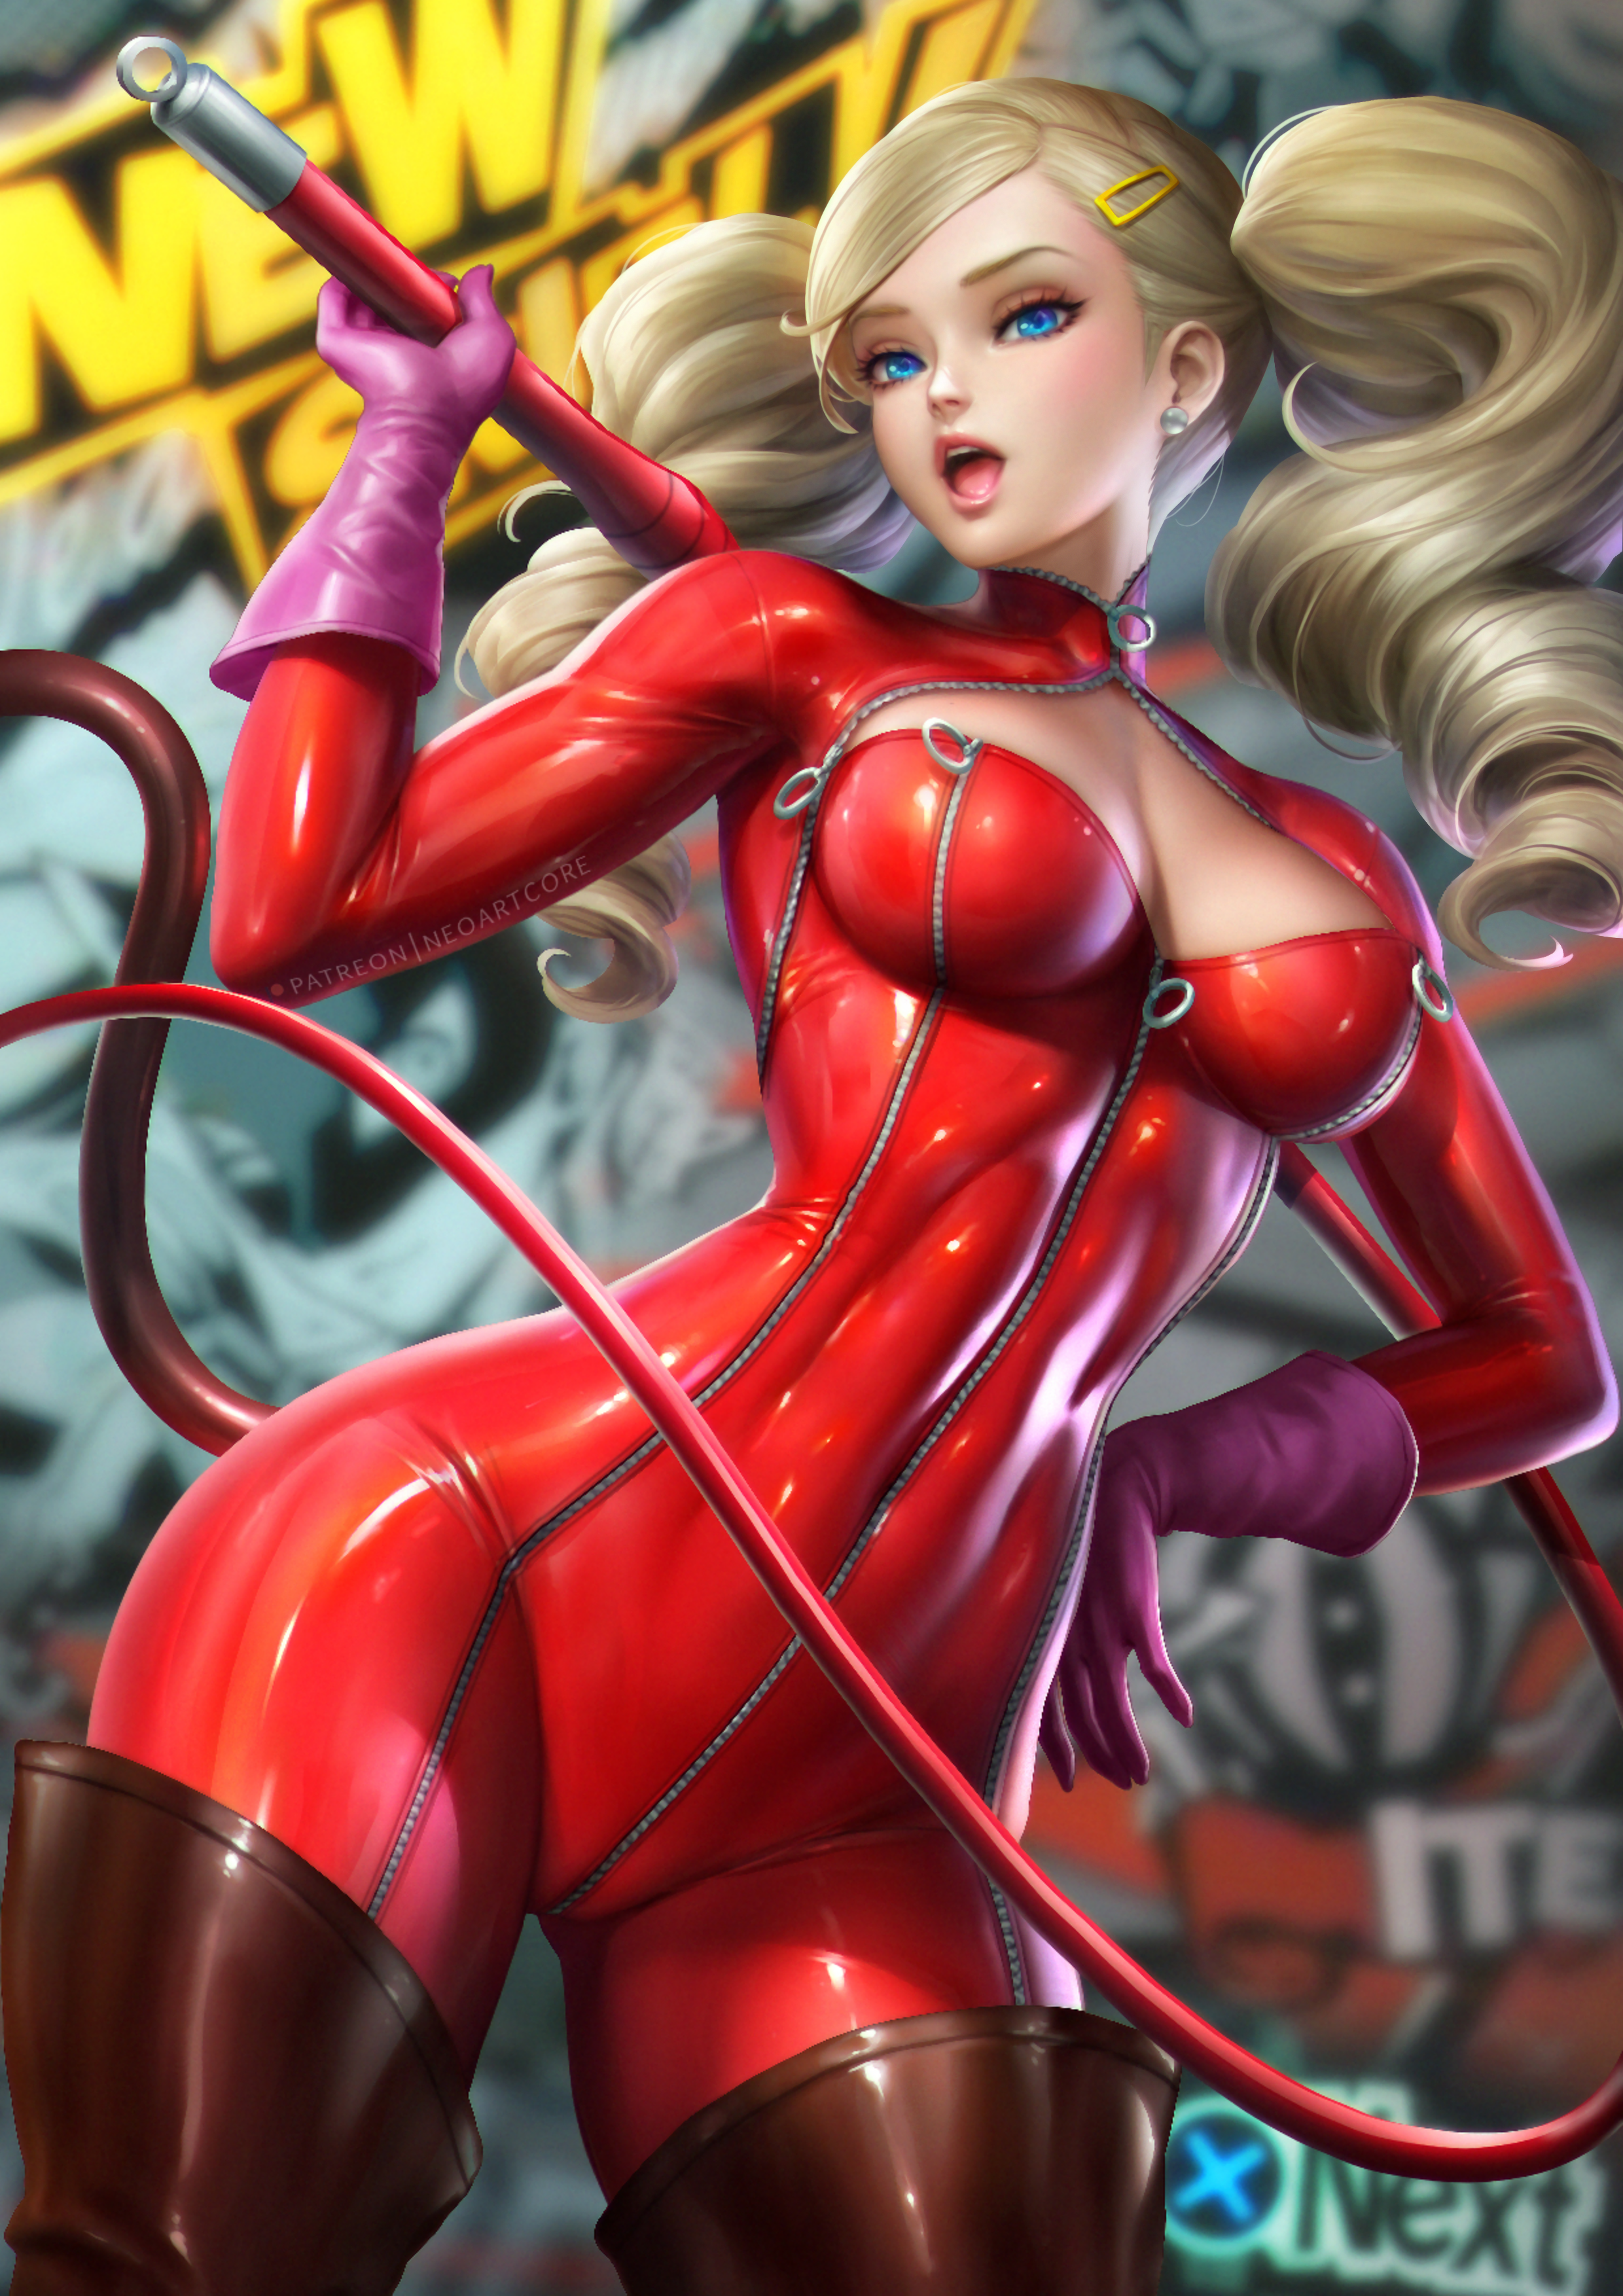 Persona 5 NeoArtCorE Artist Tight Clothing Blonde Blue Eyes Whips Zipper Looking At Viewer Standing  2480x3508